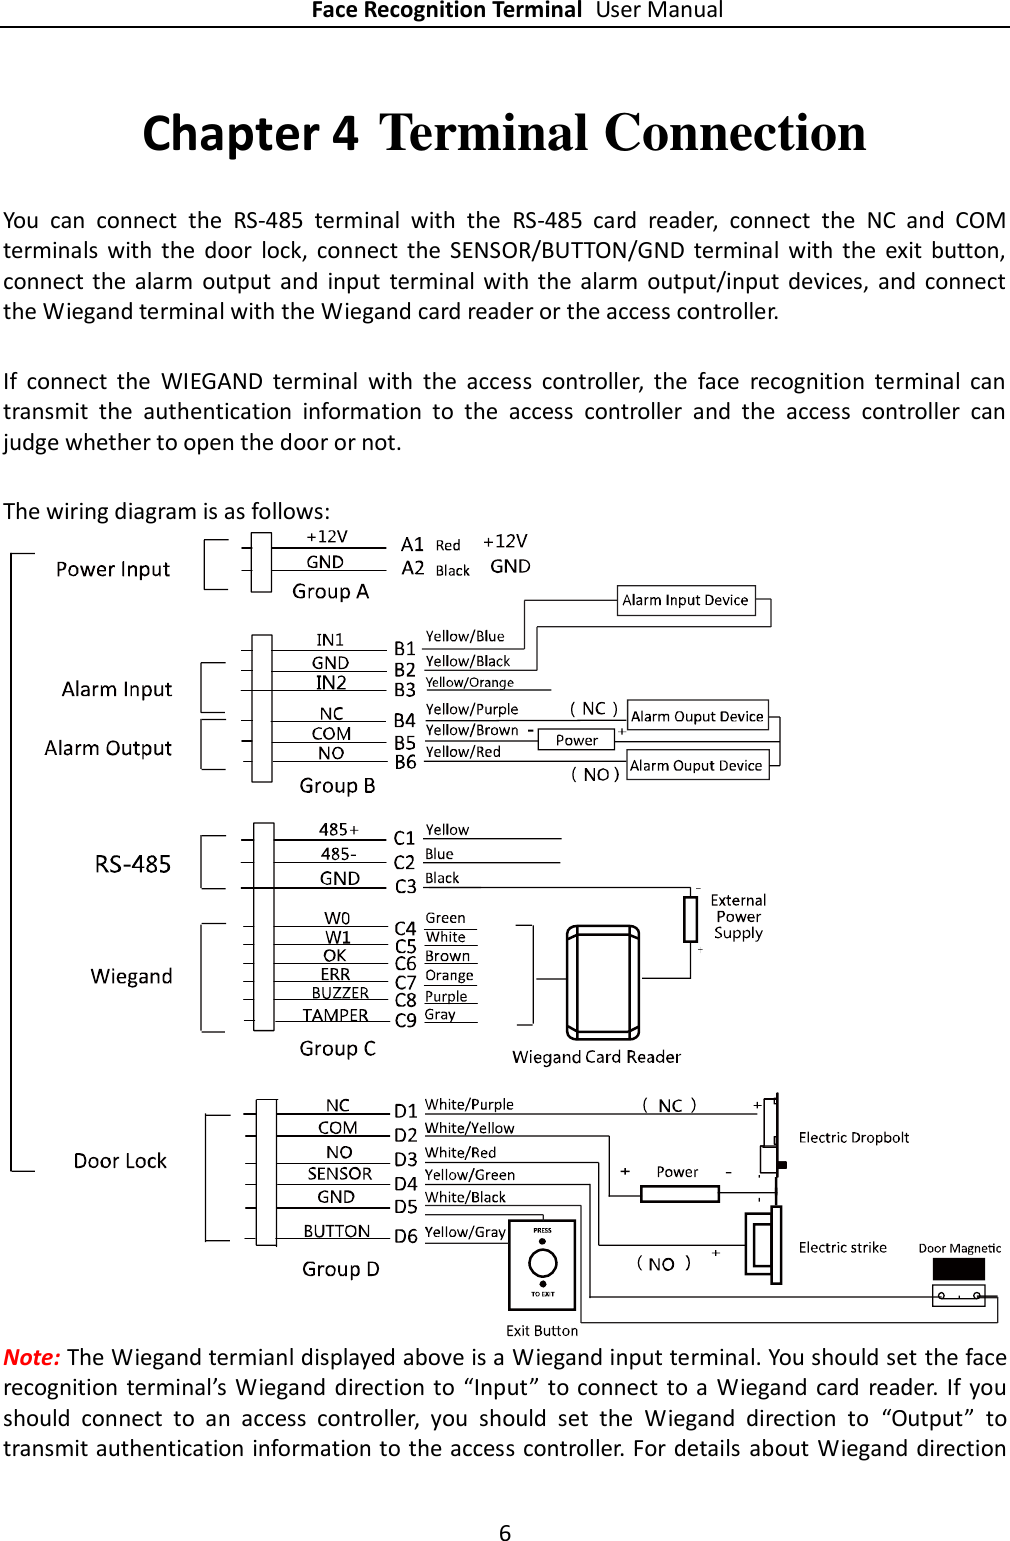 Face Recognition Terminal User Manual 6  Chapter 4 Terminal Connection   You  can  connect  the  RS-485  terminal  with  the  RS-485  card  reader,  connect  the  NC  and  COM terminals  with  the  door  lock,  connect  the  SENSOR/BUTTON/GND  terminal  with  the  exit  button, connect the  alarm  output  and  input  terminal with  the  alarm  output/input devices,  and  connect the Wiegand terminal with the Wiegand card reader or the access controller.  If  connect  the  WIEGAND  terminal  with  the  access  controller,  the  face  recognition  terminal  can transmit  the  authentication  information  to  the  access  controller  and  the  access  controller  can judge whether to open the door or not.  The wiring diagram is as follows:  Note: The Wiegand termianl displayed above is a Wiegand input terminal. You should set the face recognition terminal’s Wiegand direction to  “Input”  to connect to a  Wiegand card reader.  If you should  connect  to  an  access  controller,  you  should  set  the  Wiegand  direction  to  “Output”  to transmit authentication information to the access controller. For details about Wiegand direction 